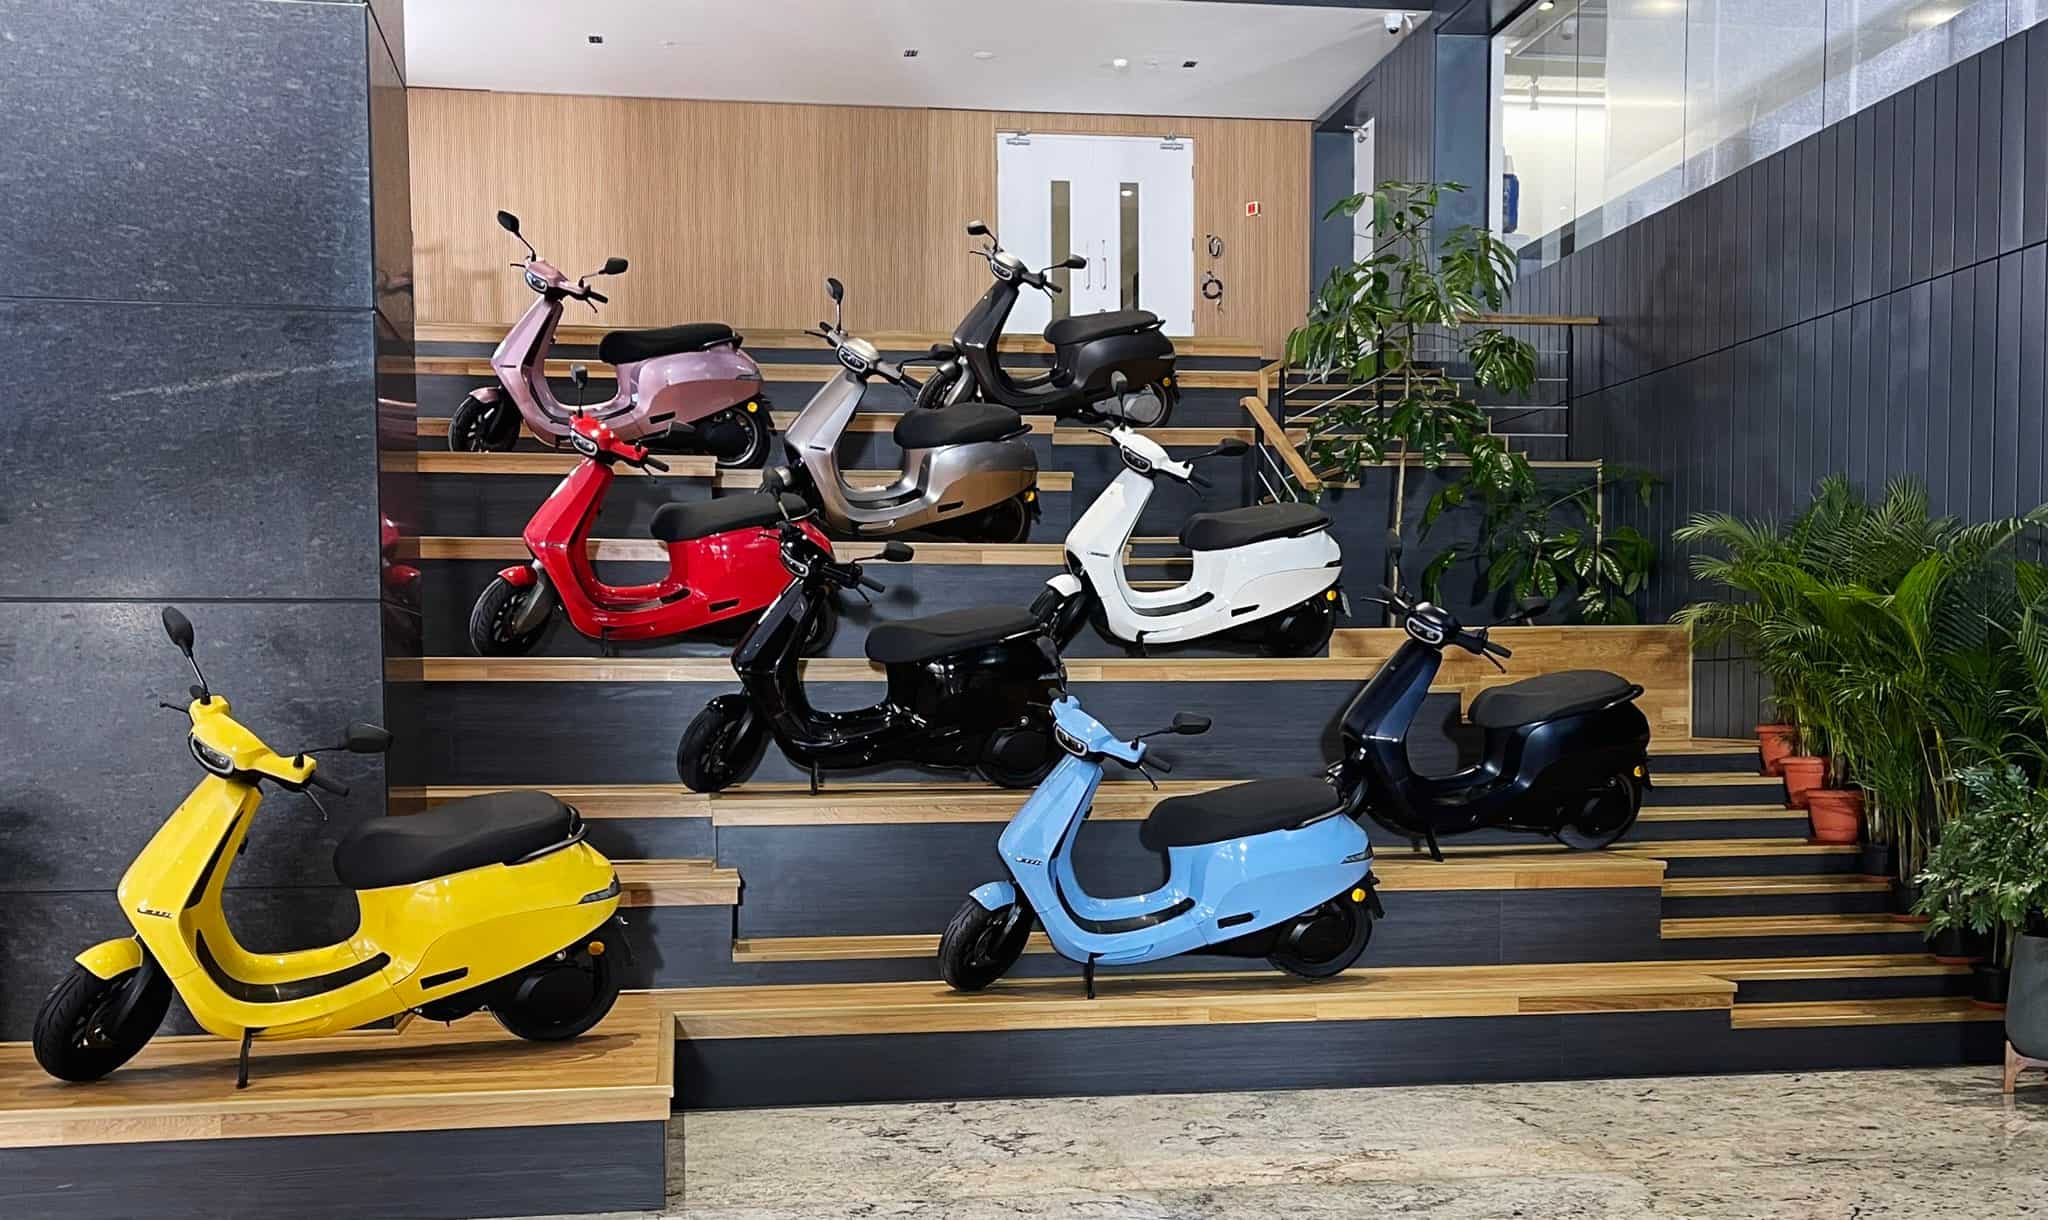 Ola Electric Scooters S1, S1 Pro: Important update on final payment for buyers - What Bhavish Aggarwal confirmed